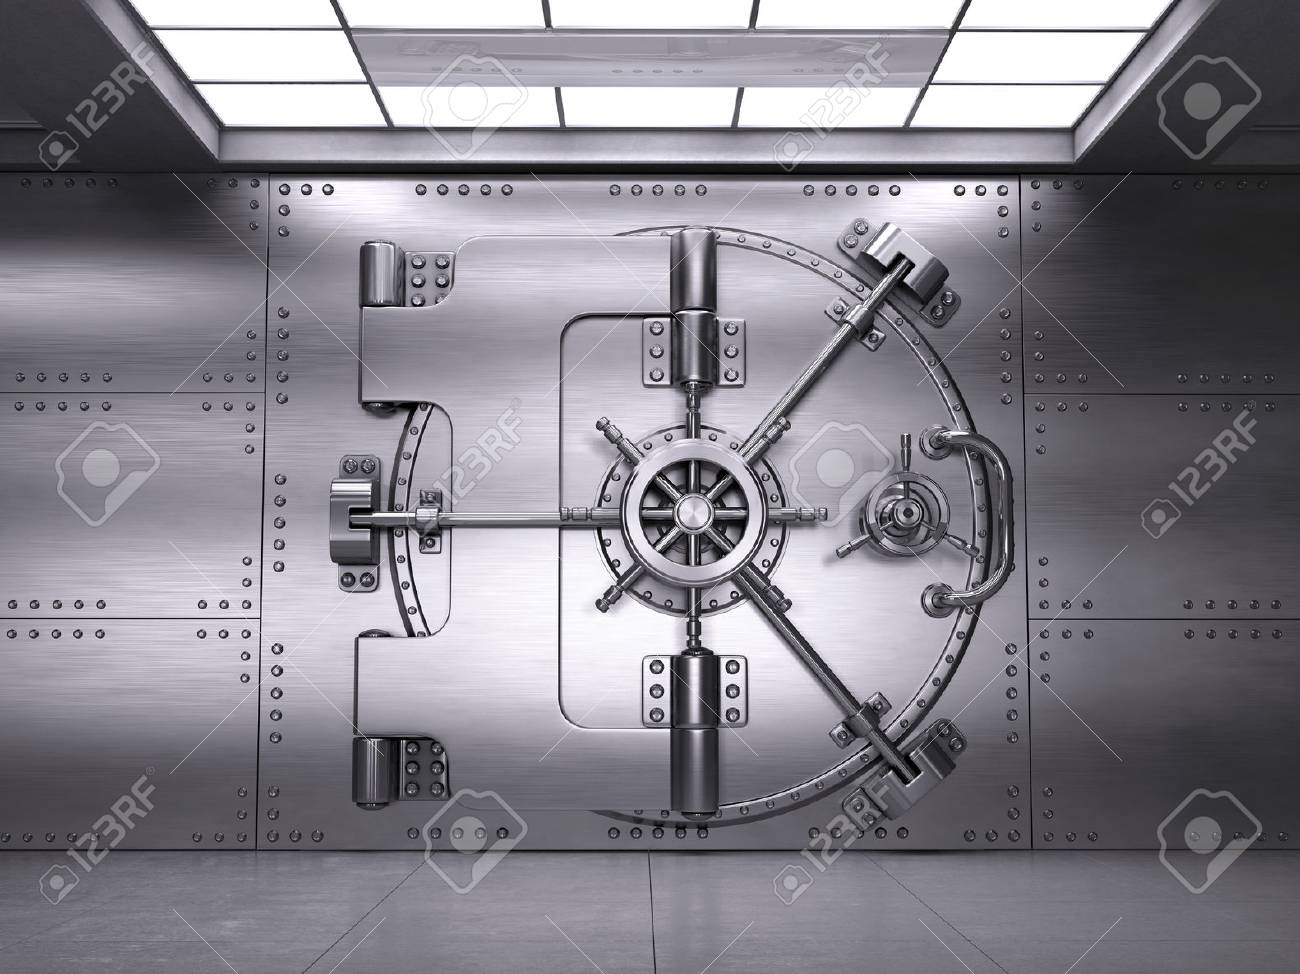 Detail Picture Of A Bank Vault Nomer 15